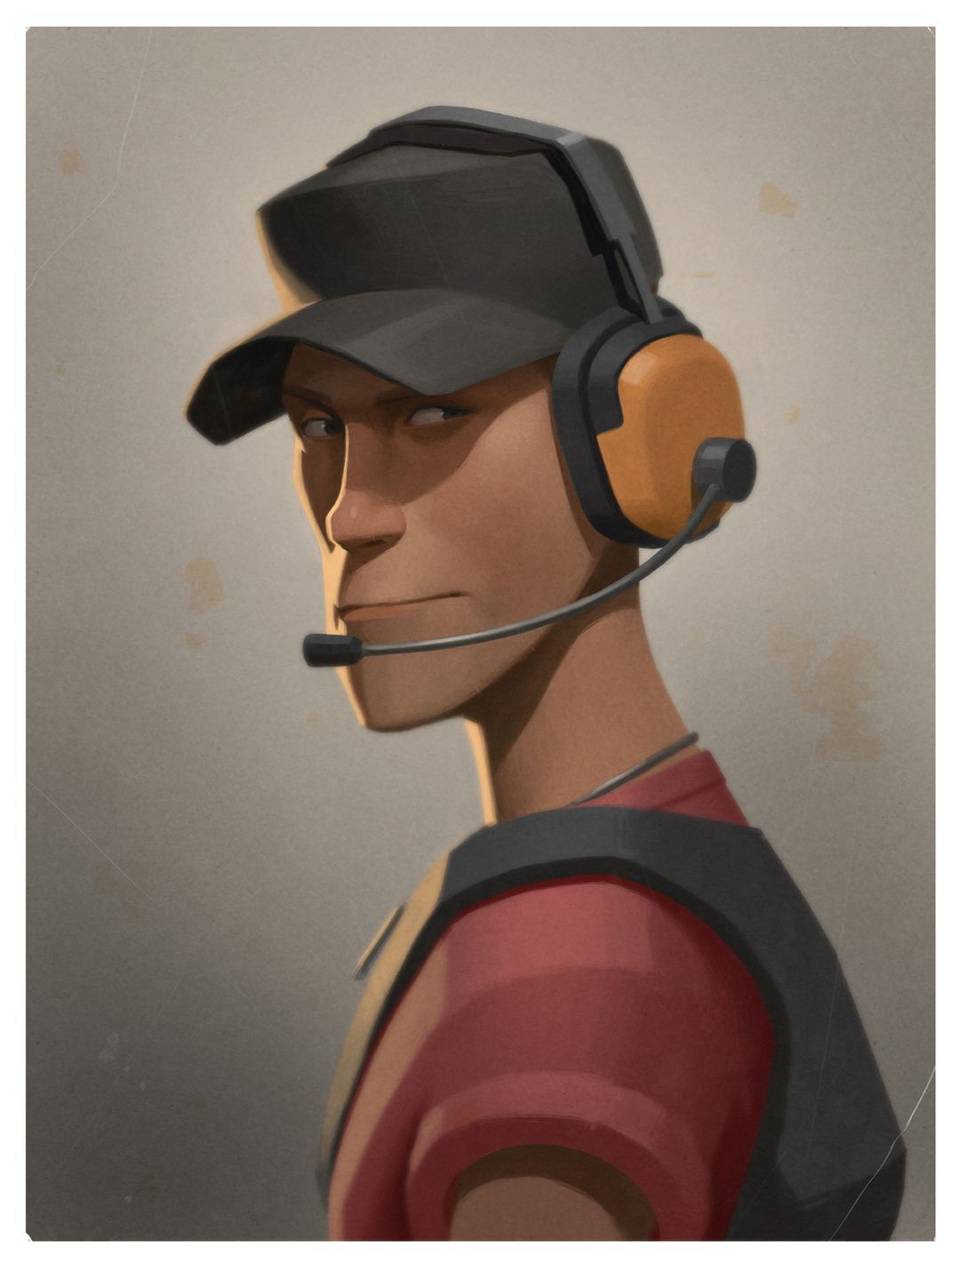 red scout team fortress 2